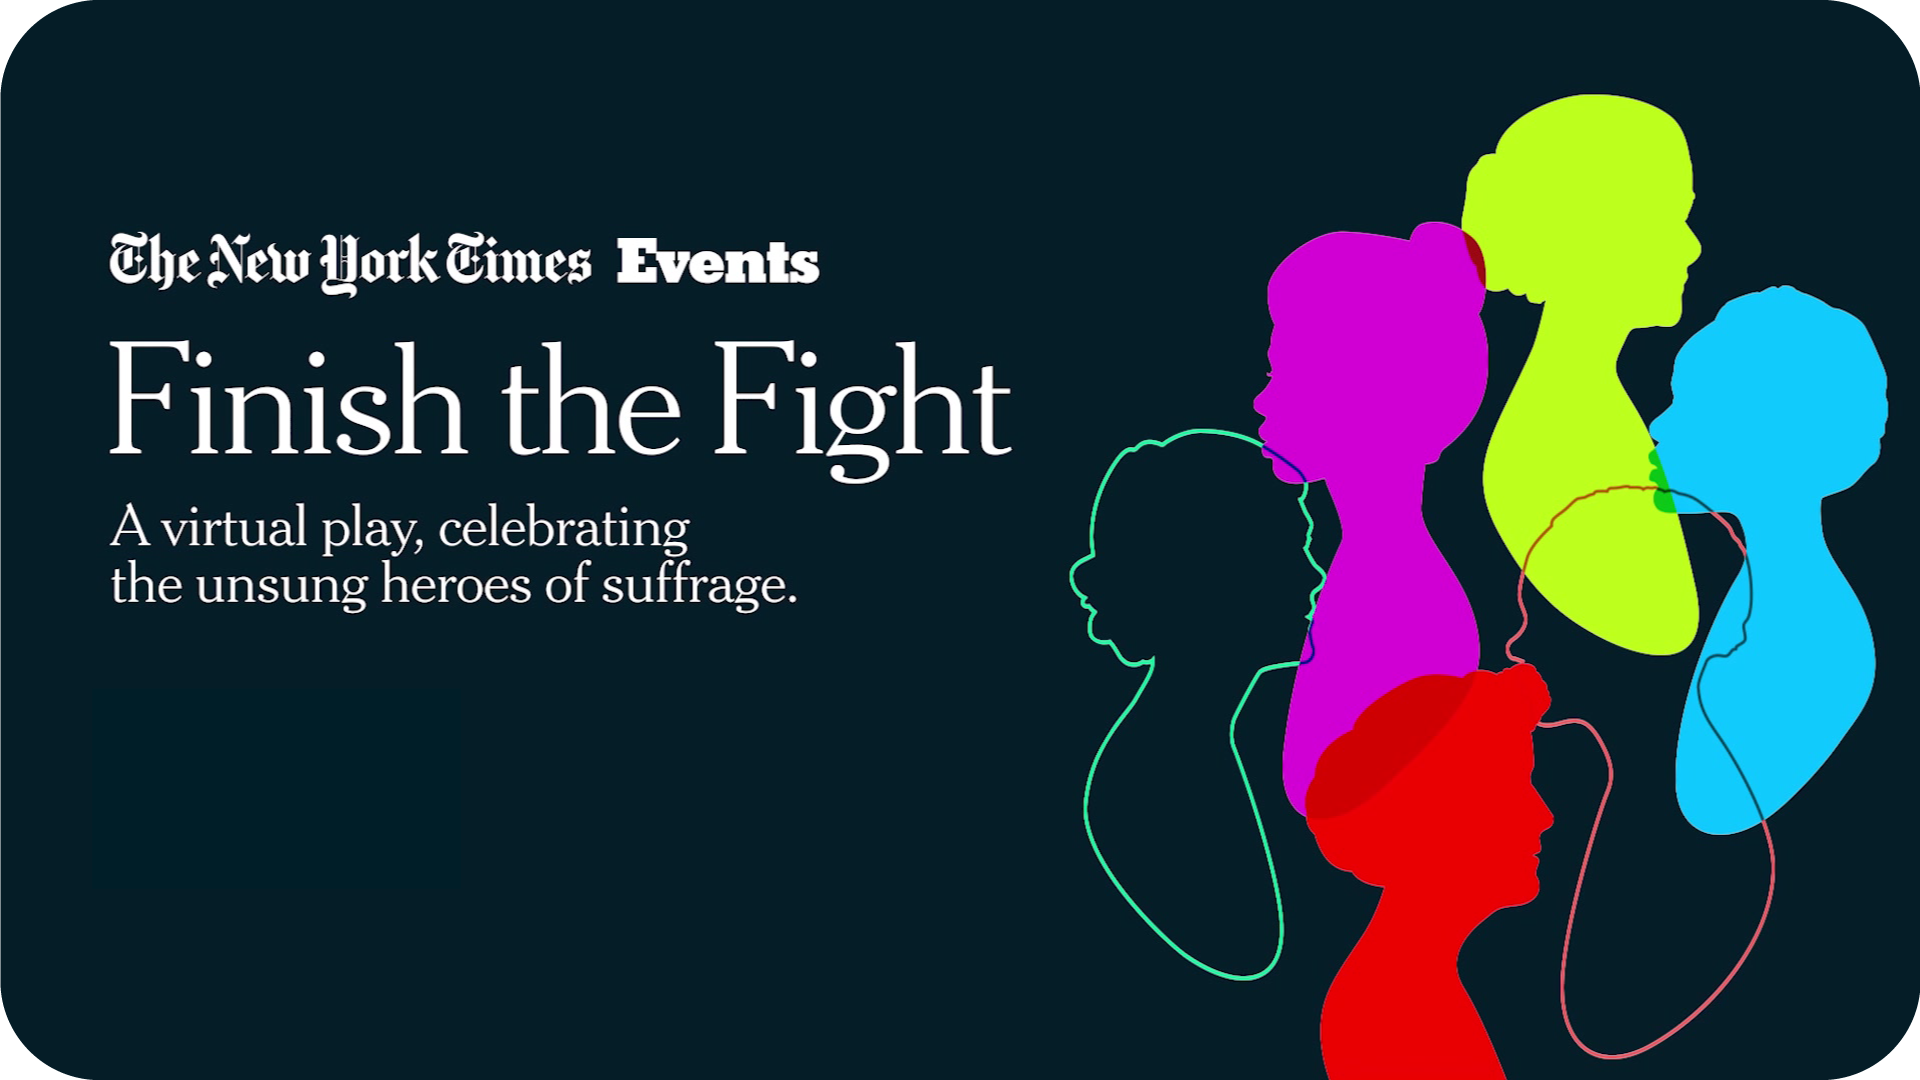 The New York Times – Finish the Fight